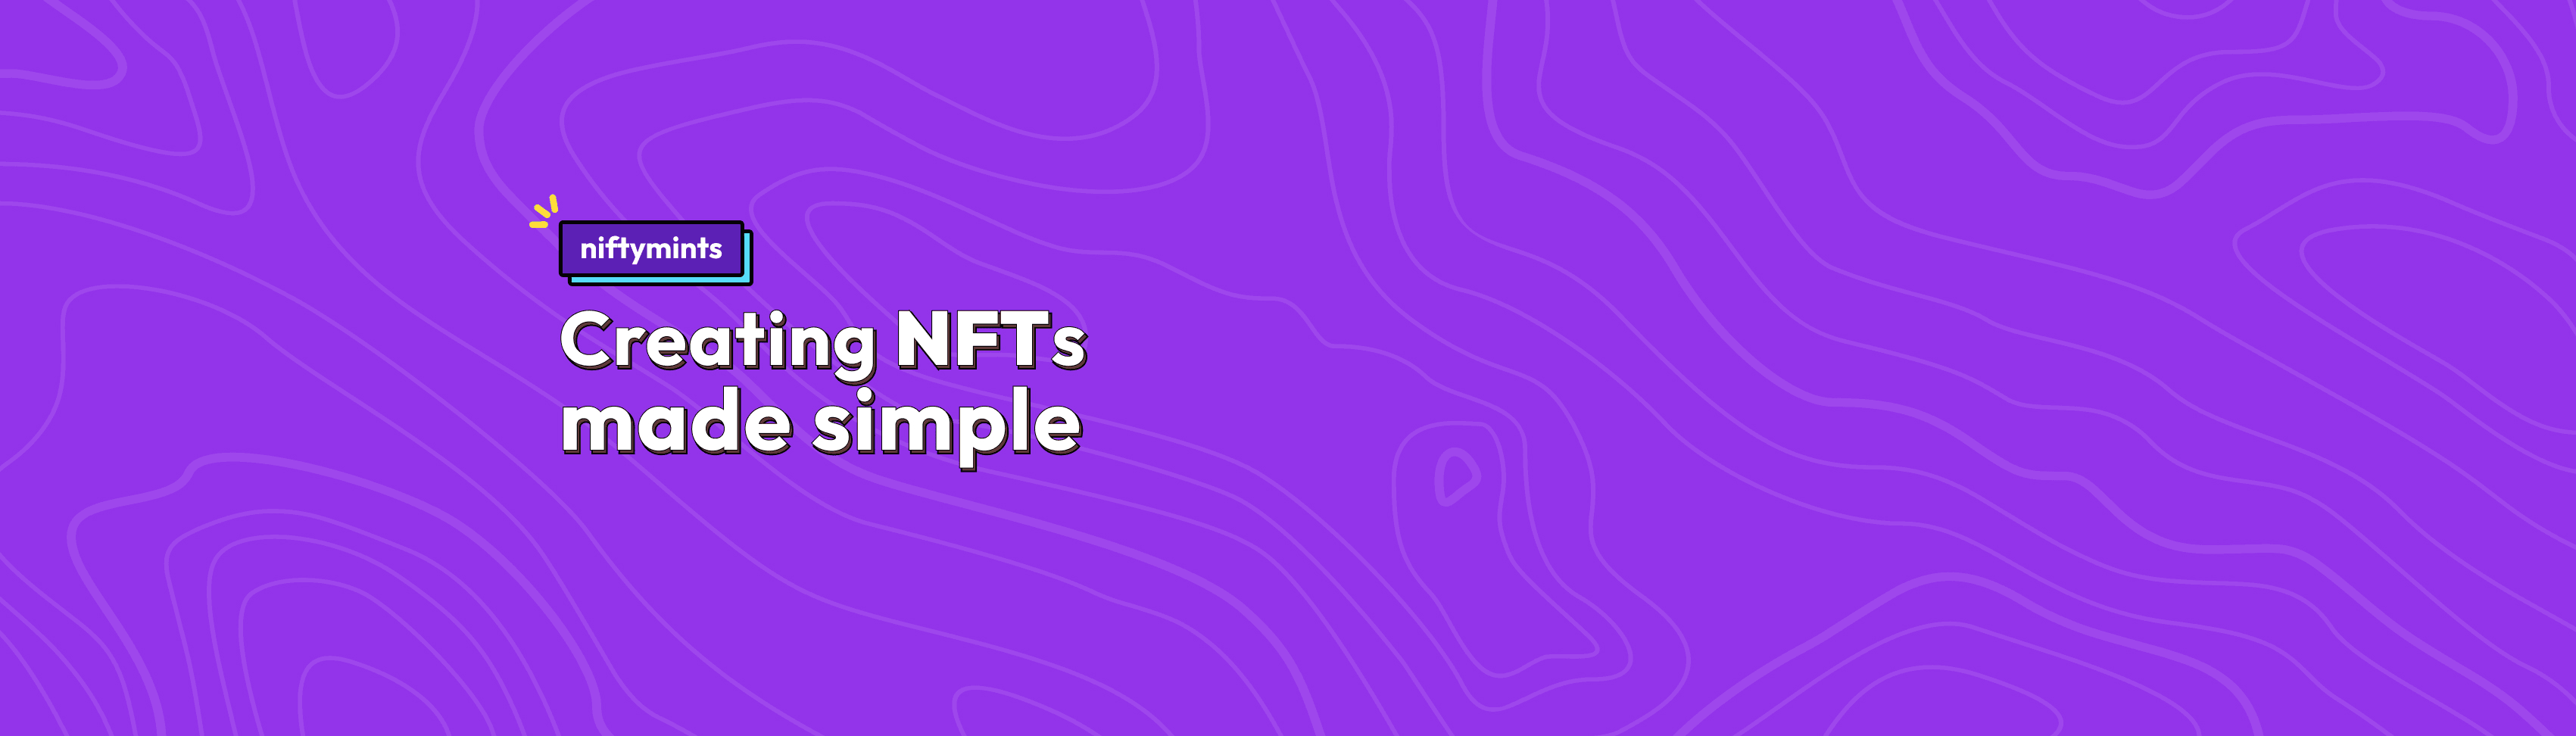 niftymints banner